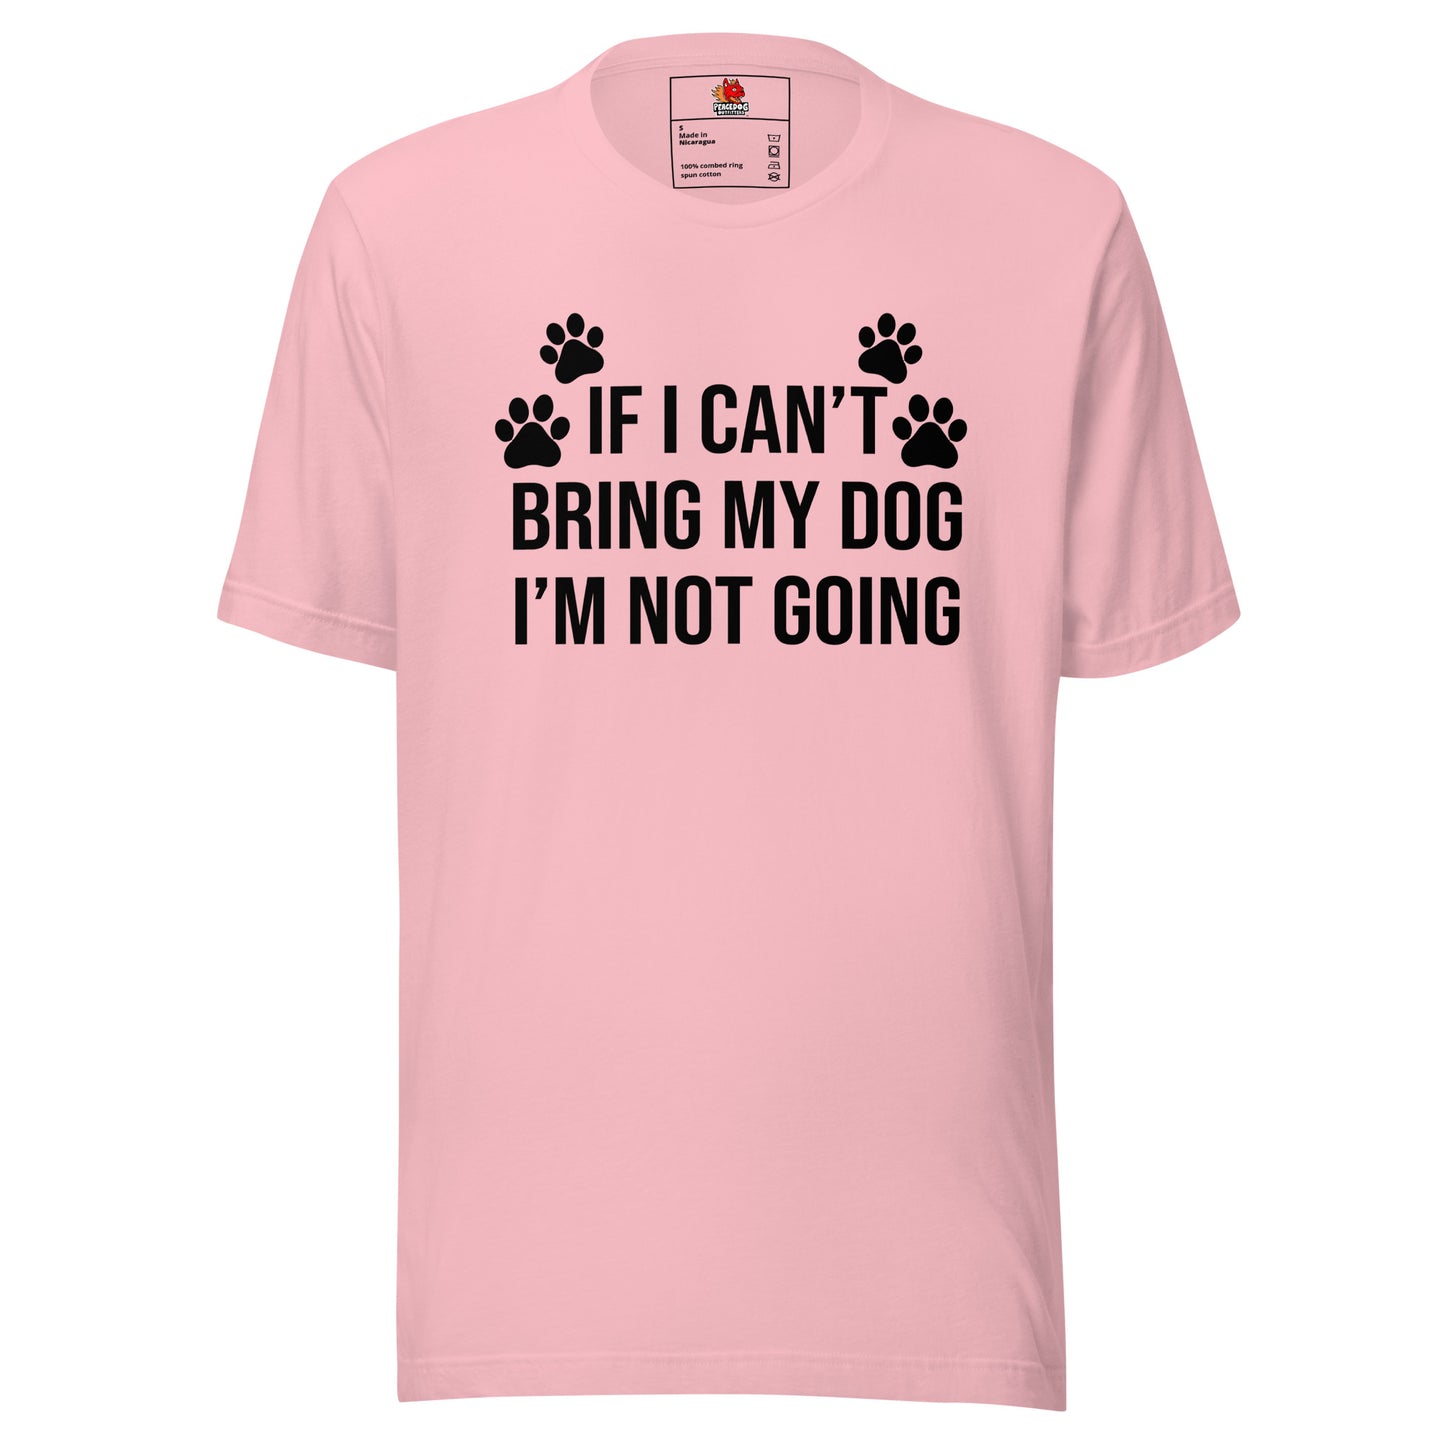 If I Can't Bring My Dog, I'm Not Going T-shirt